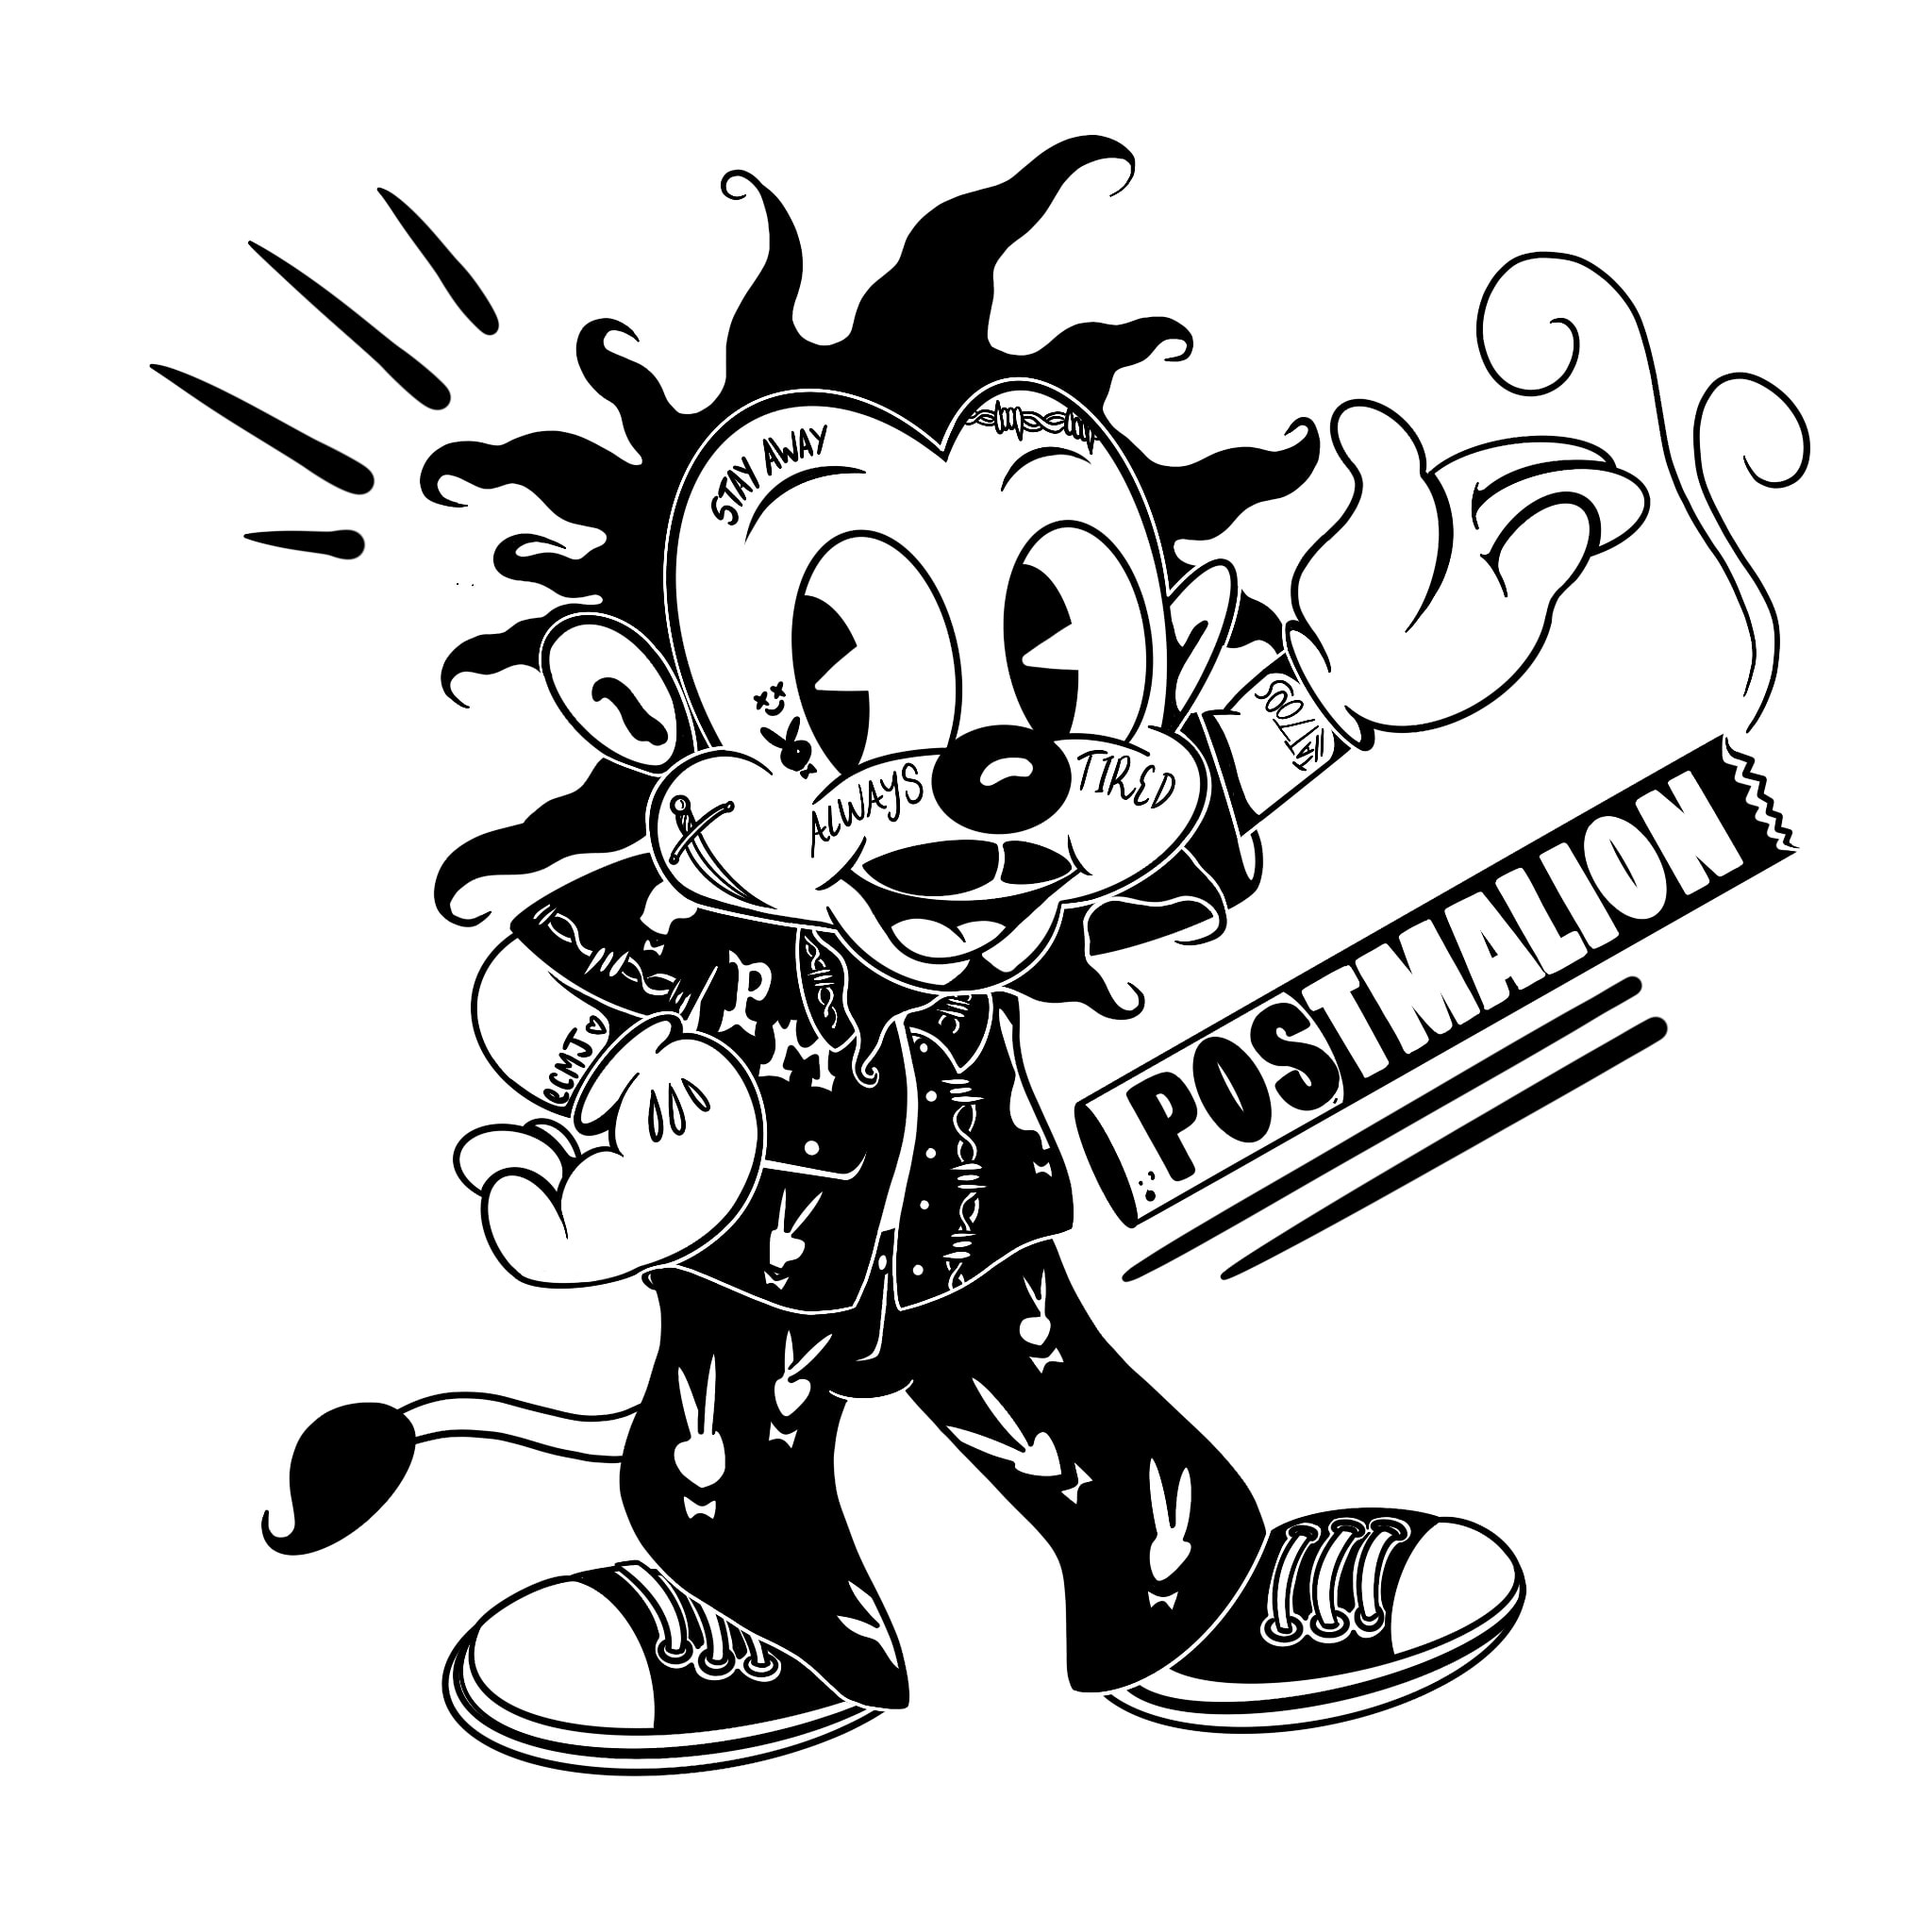 Black and white vintage cartoon character or logo by Ecmojo | Fiverr